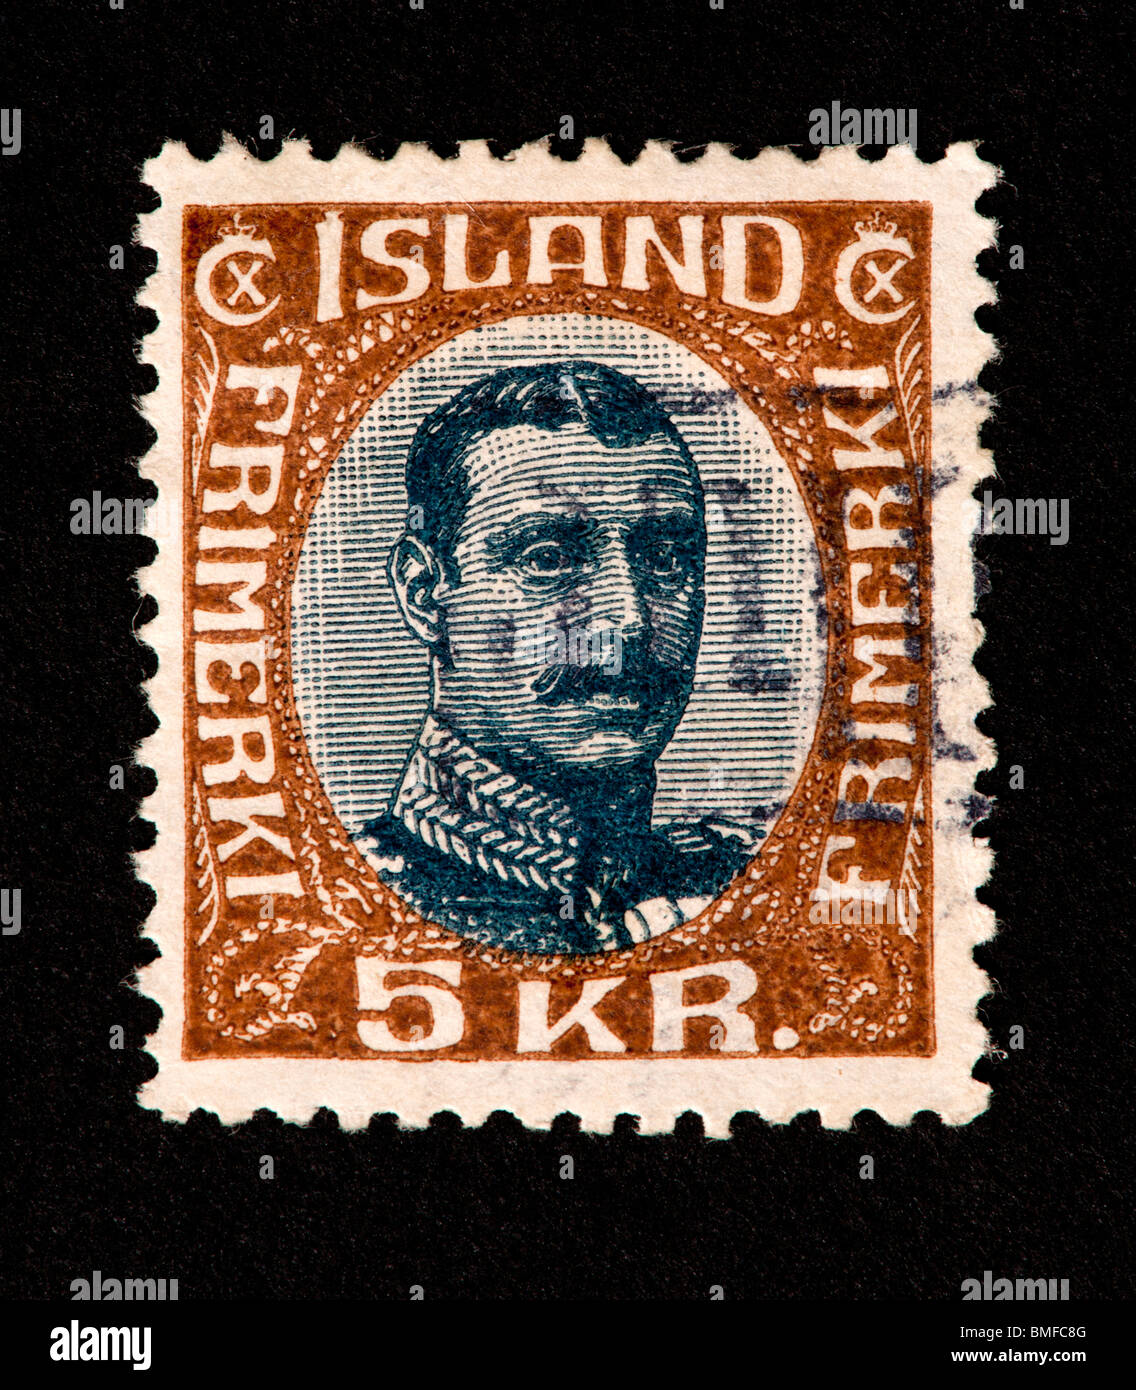 Postage stamp from Iceland depicting King Christian X. Stock Photo